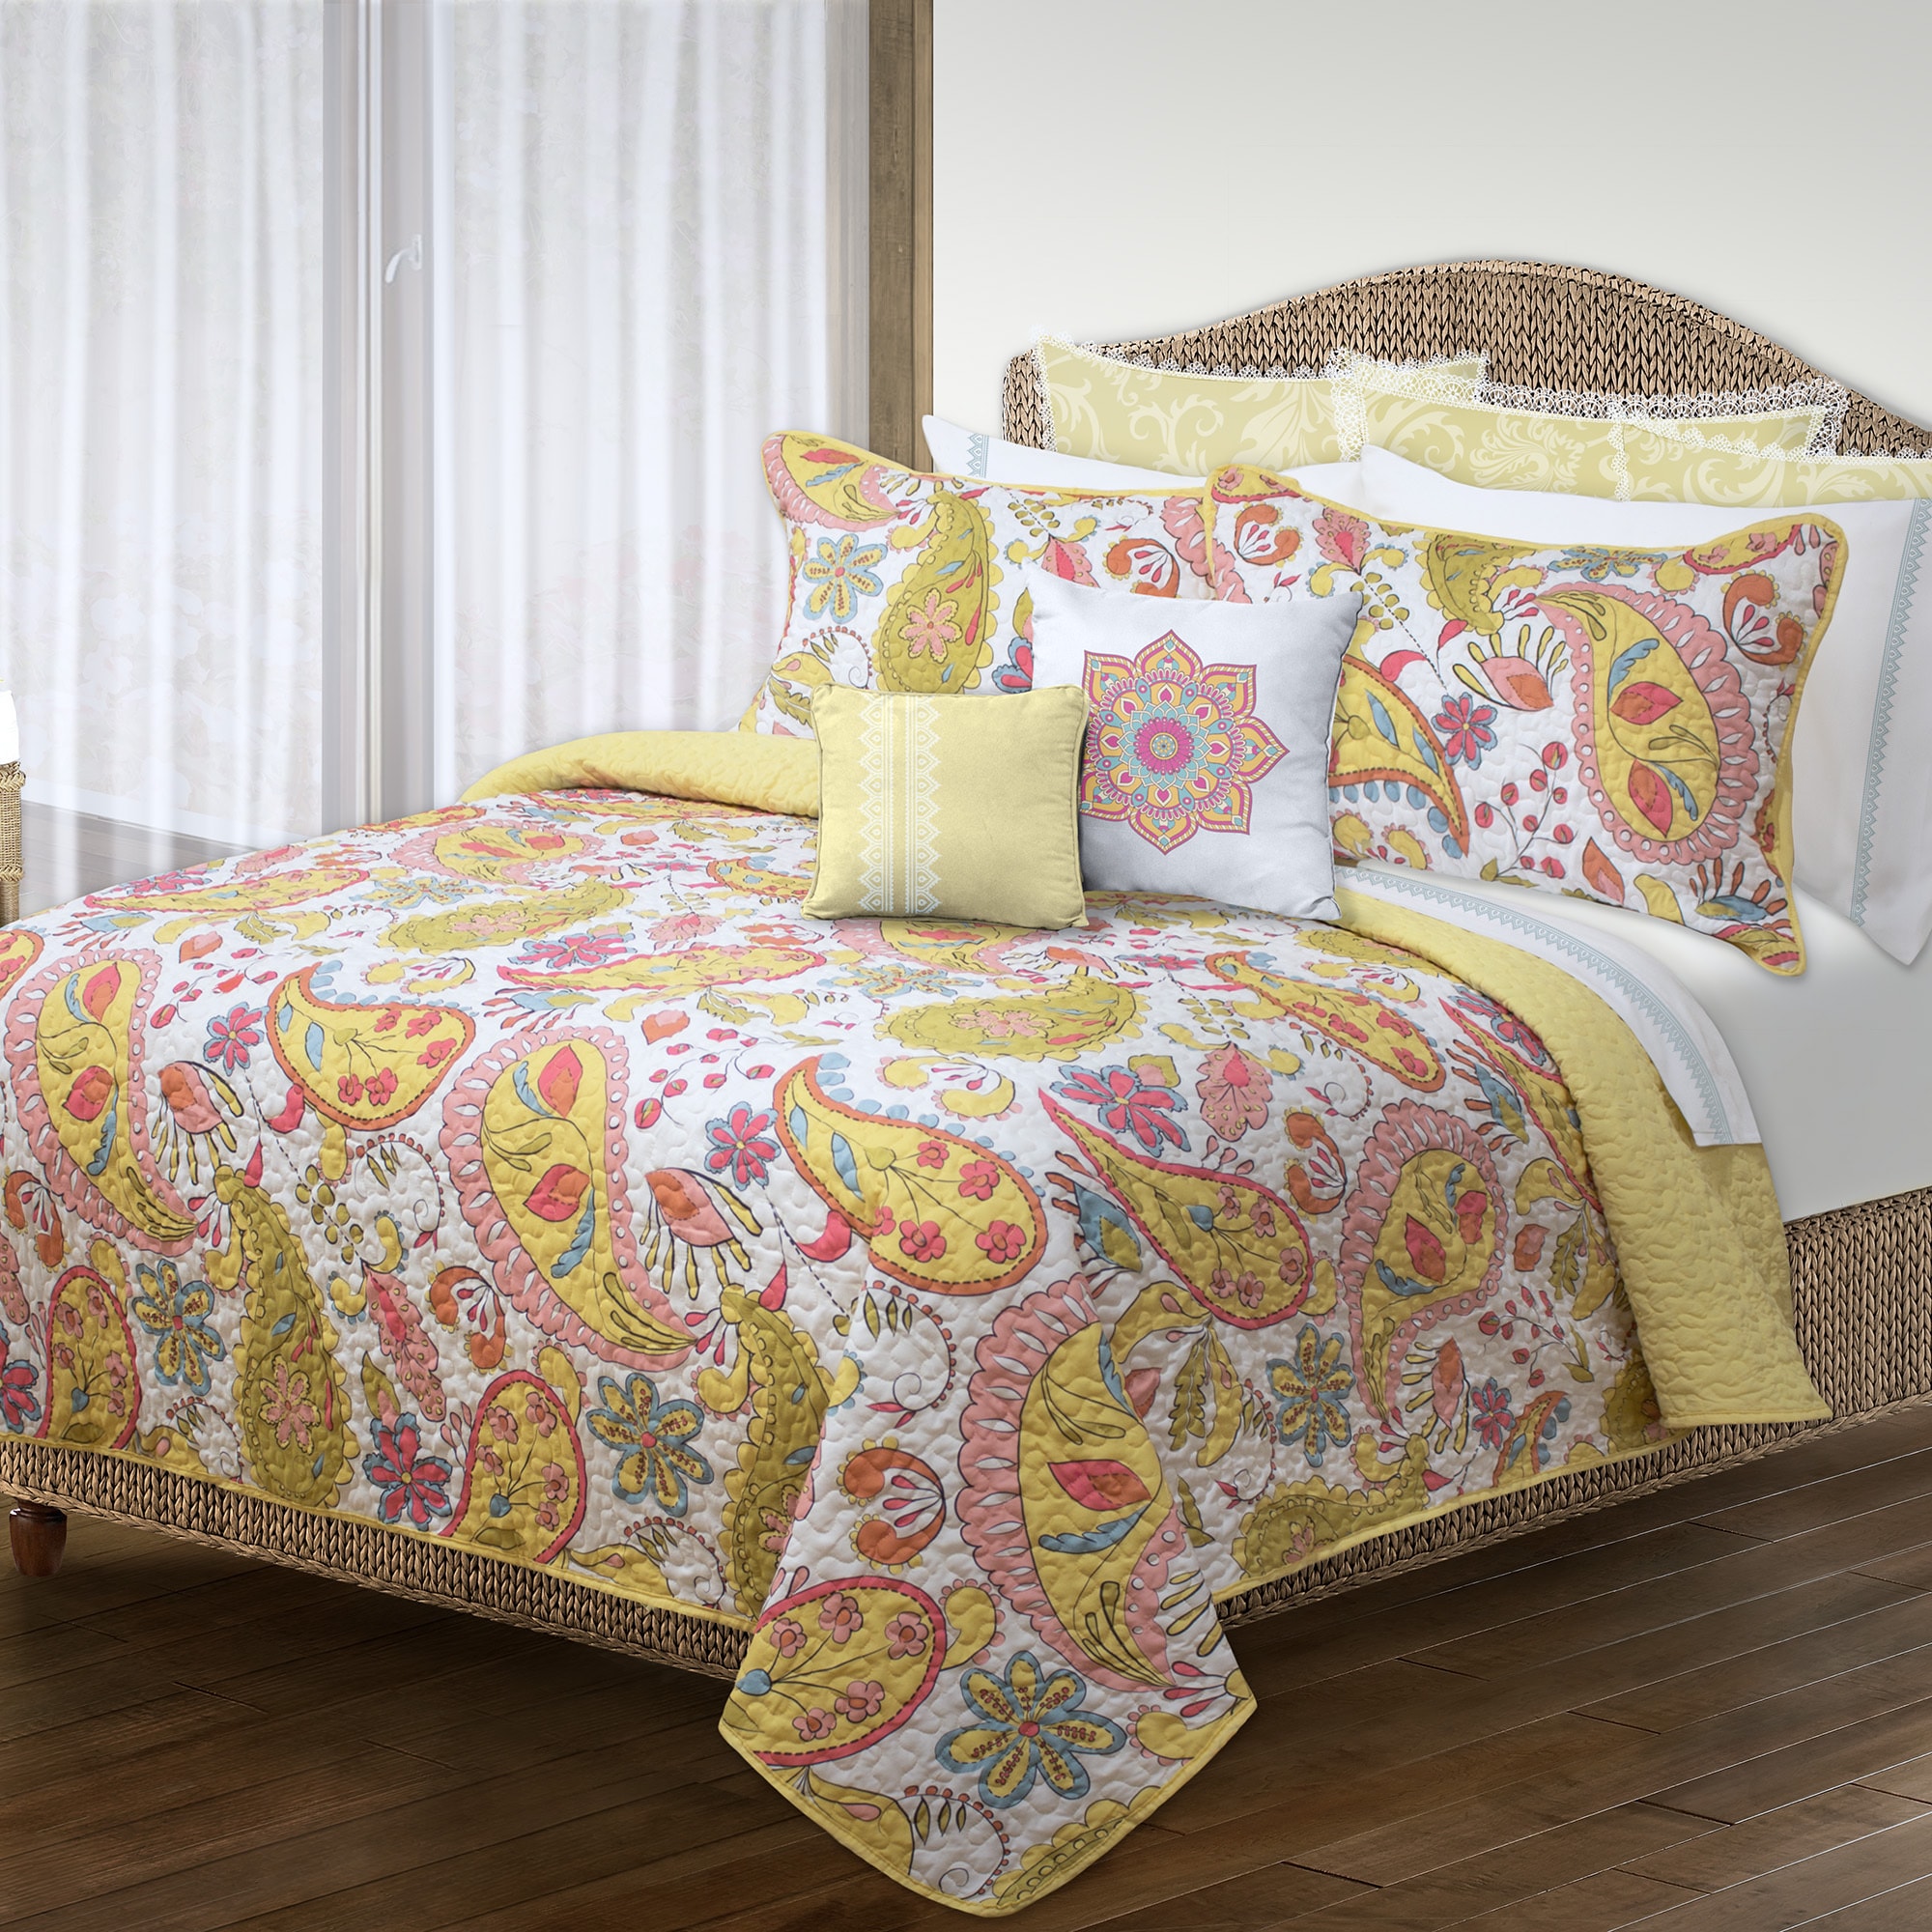 Shop Bliss Printed Quilt And Sham Set On Sale Overstock 14664313